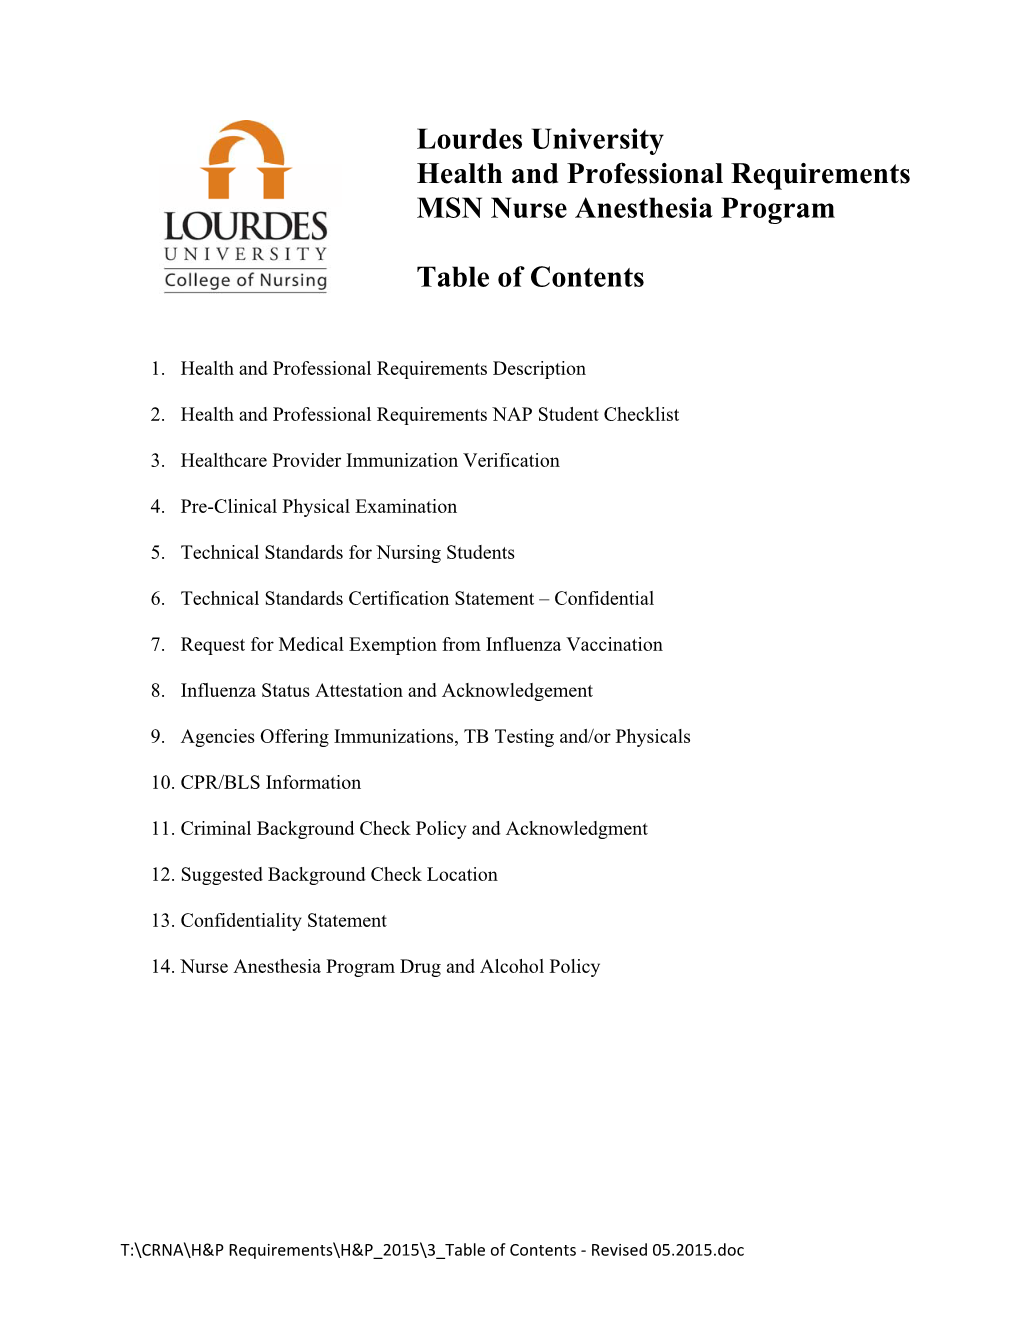 Lourdes University Health and Professional Requirements MSN Nurse Anesthesia Program Table of Contents